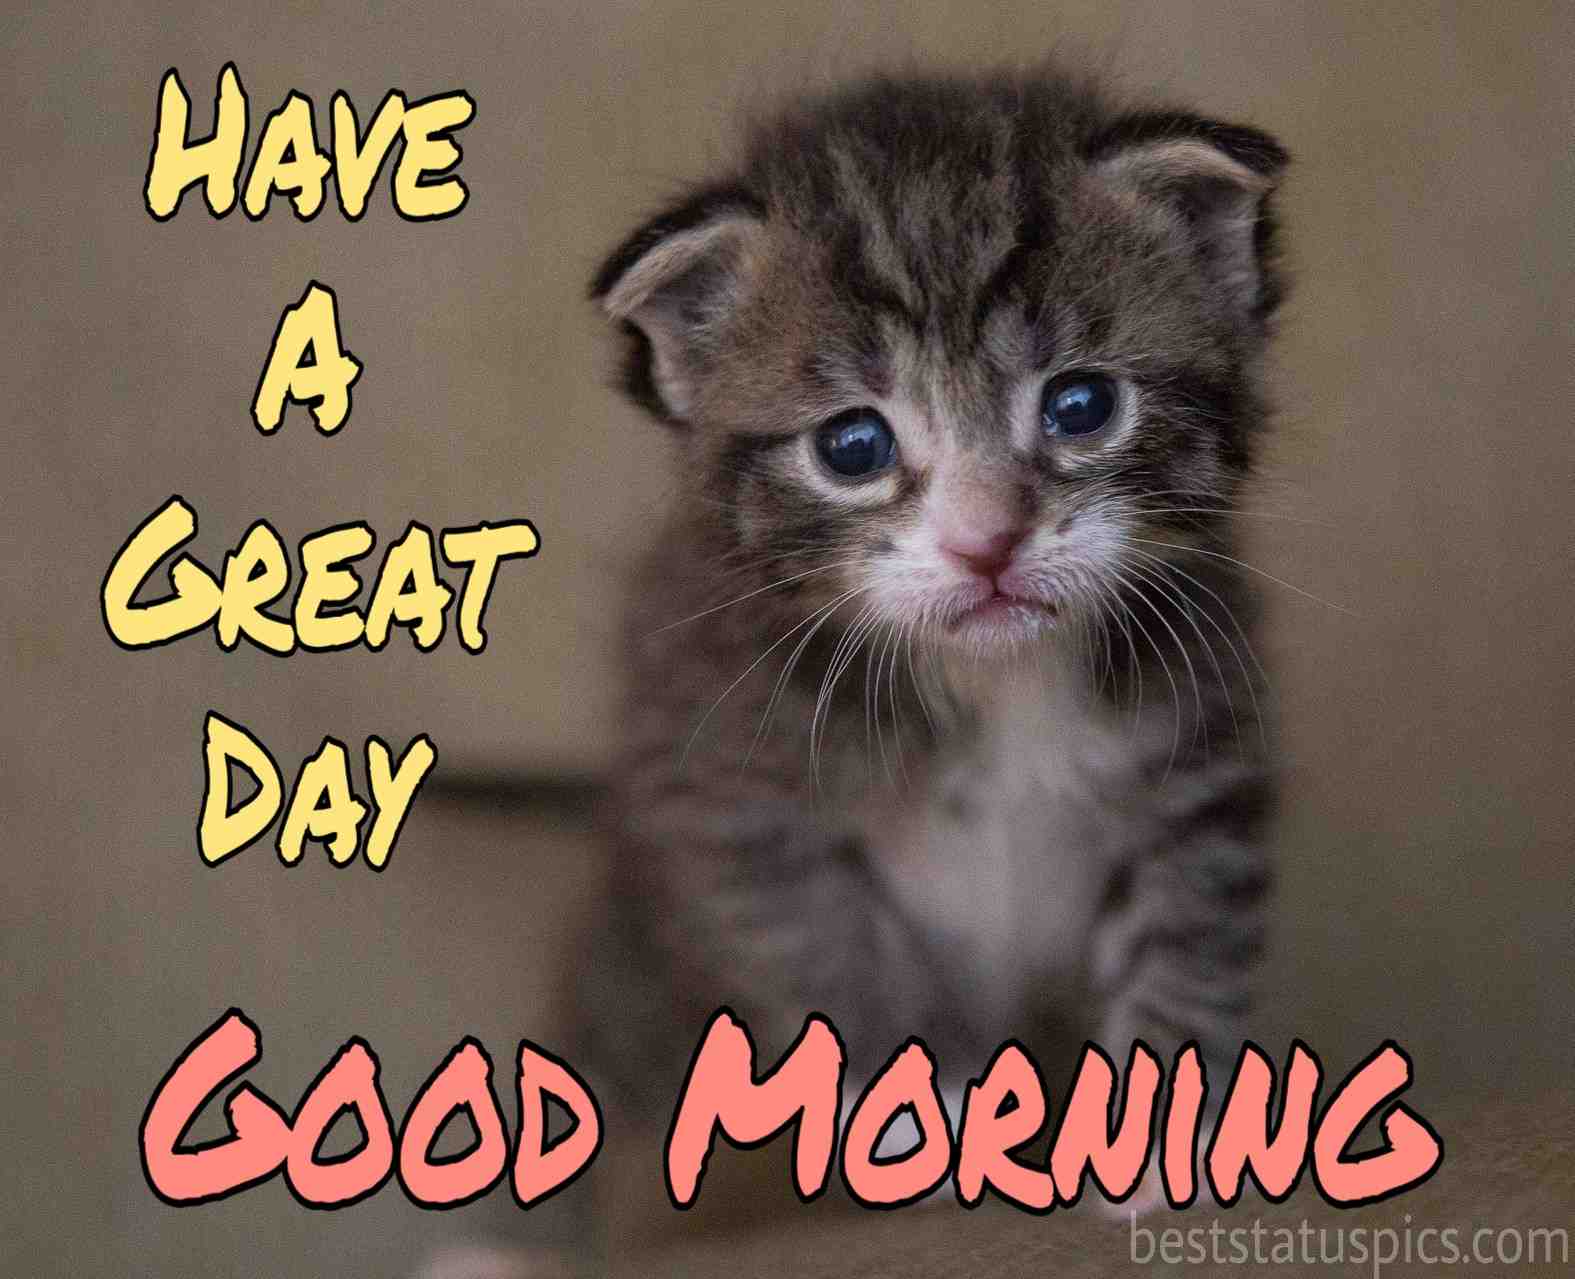 51+ Cute Good Morning Baby Images Pictures For Whatsapp - Best Status Pics